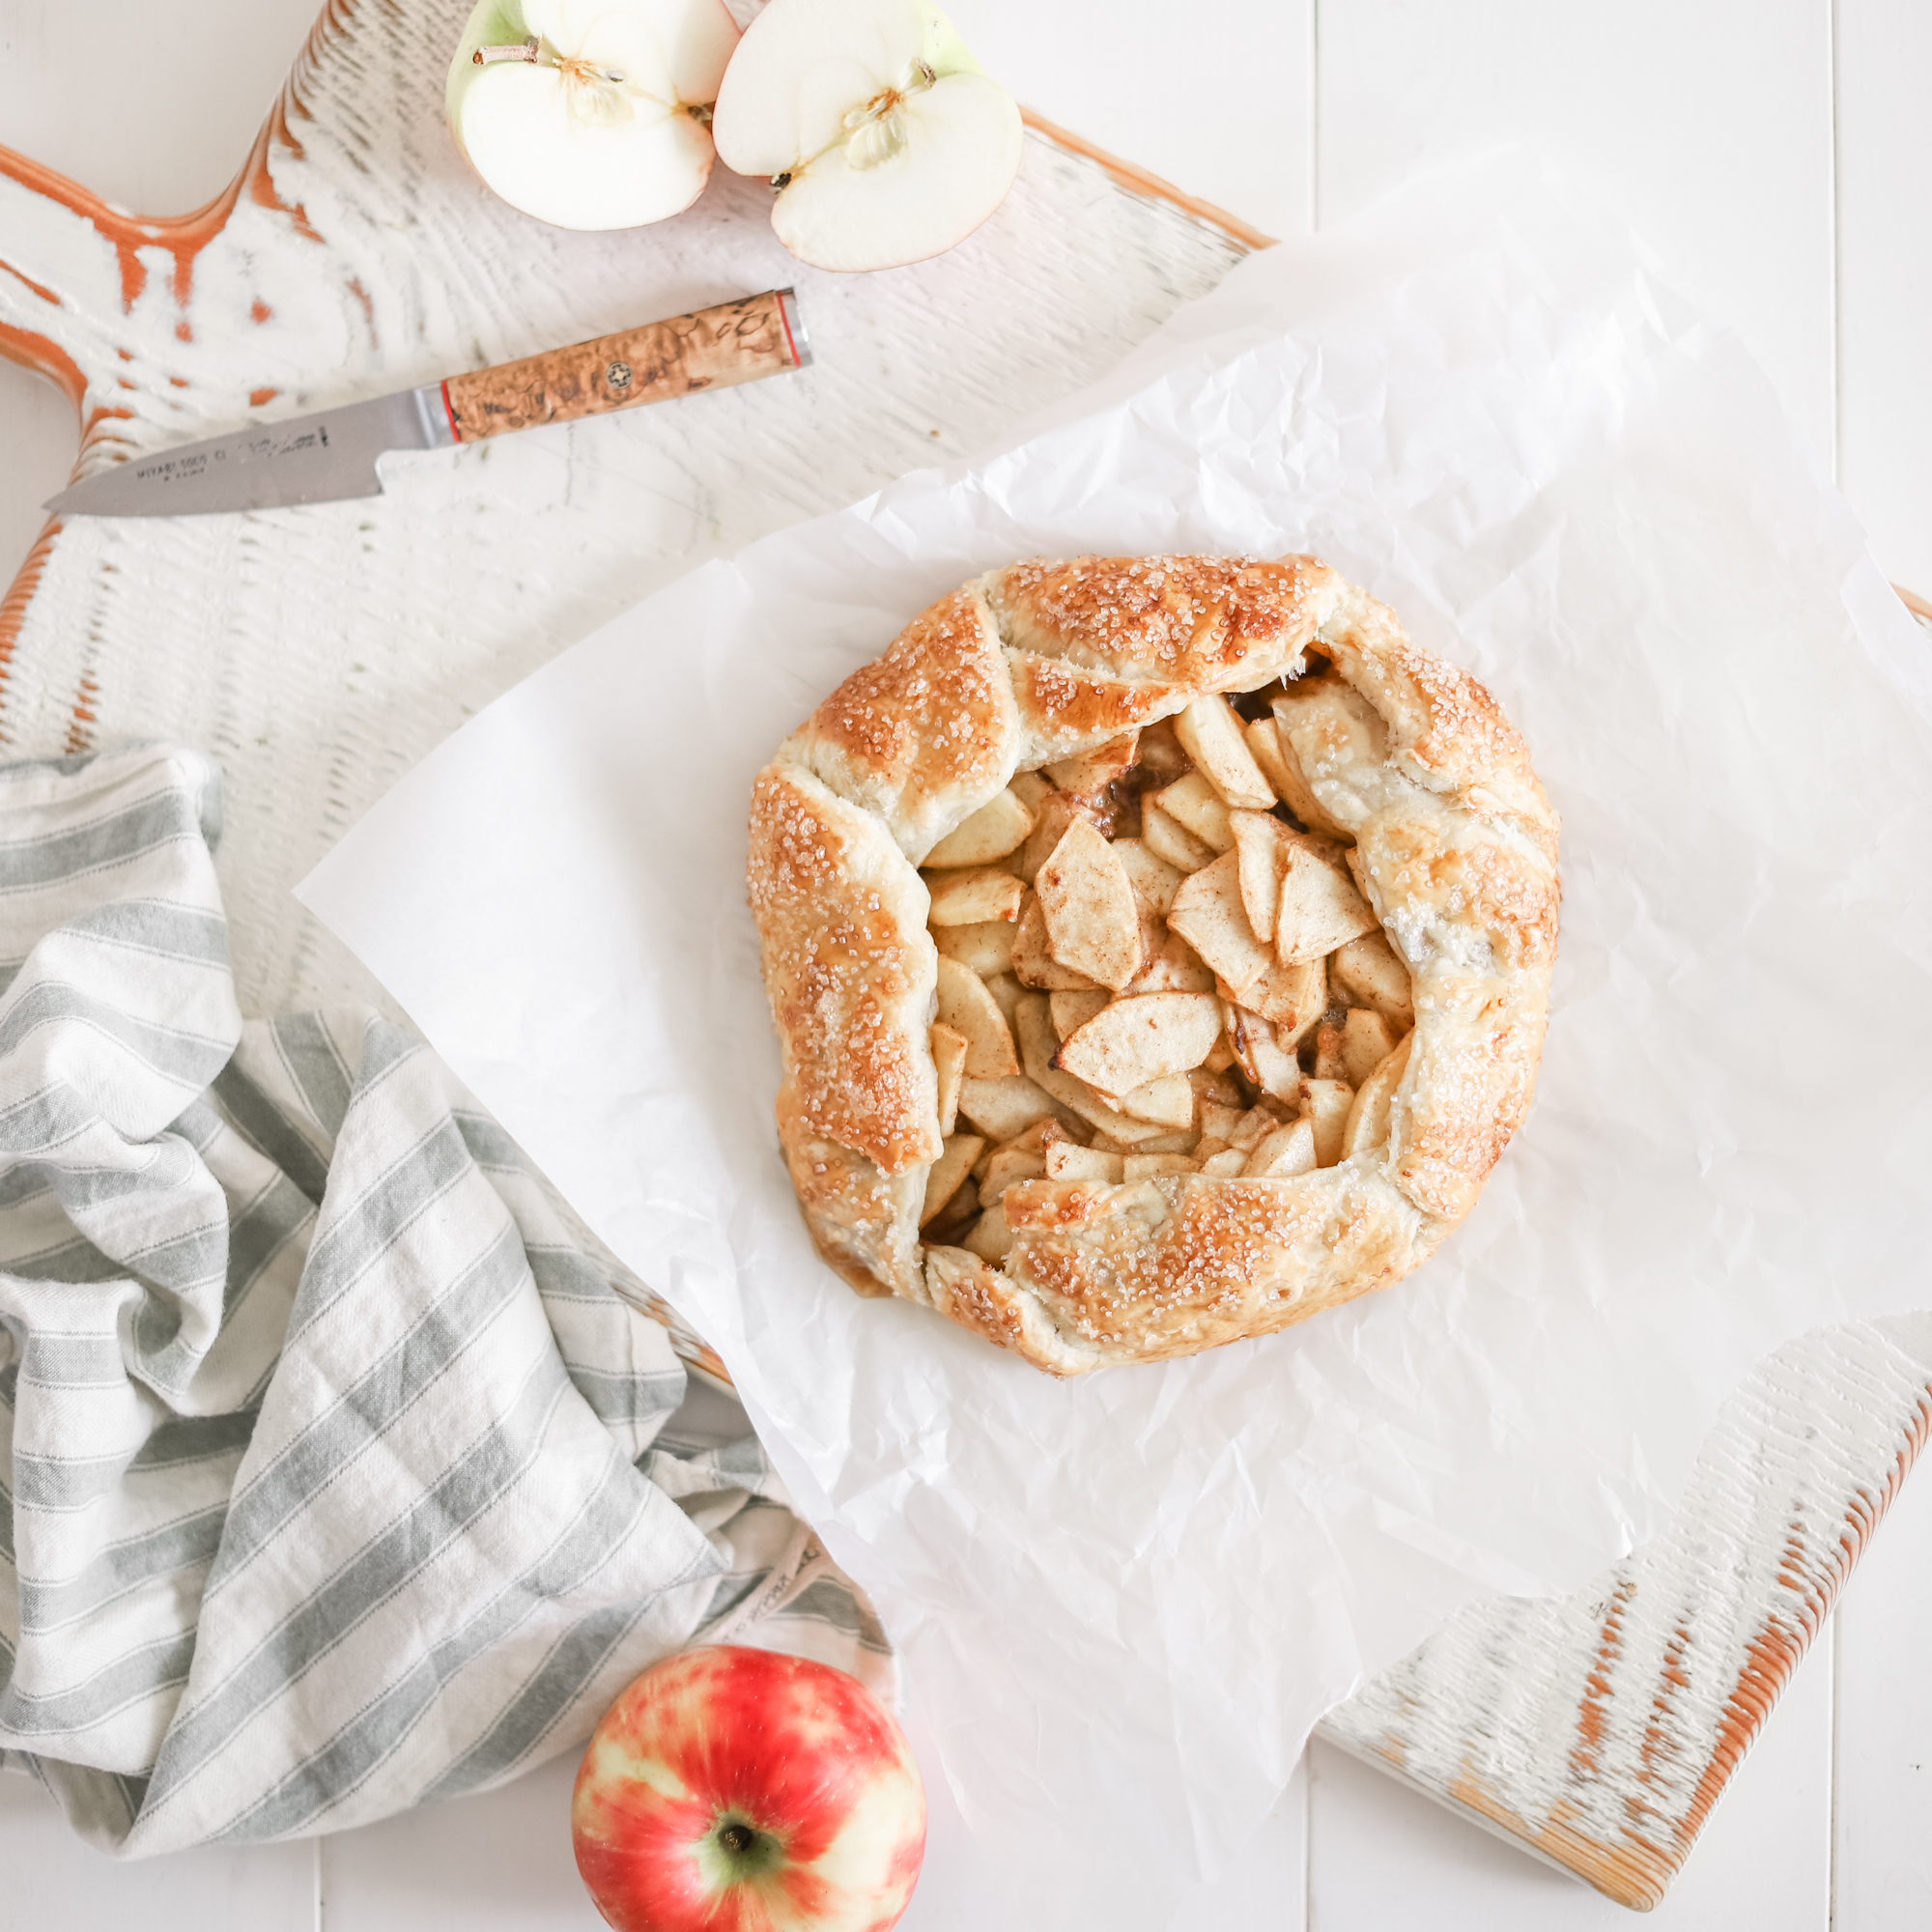 Best Apple Galette Recipe - How to Make Apple Galette